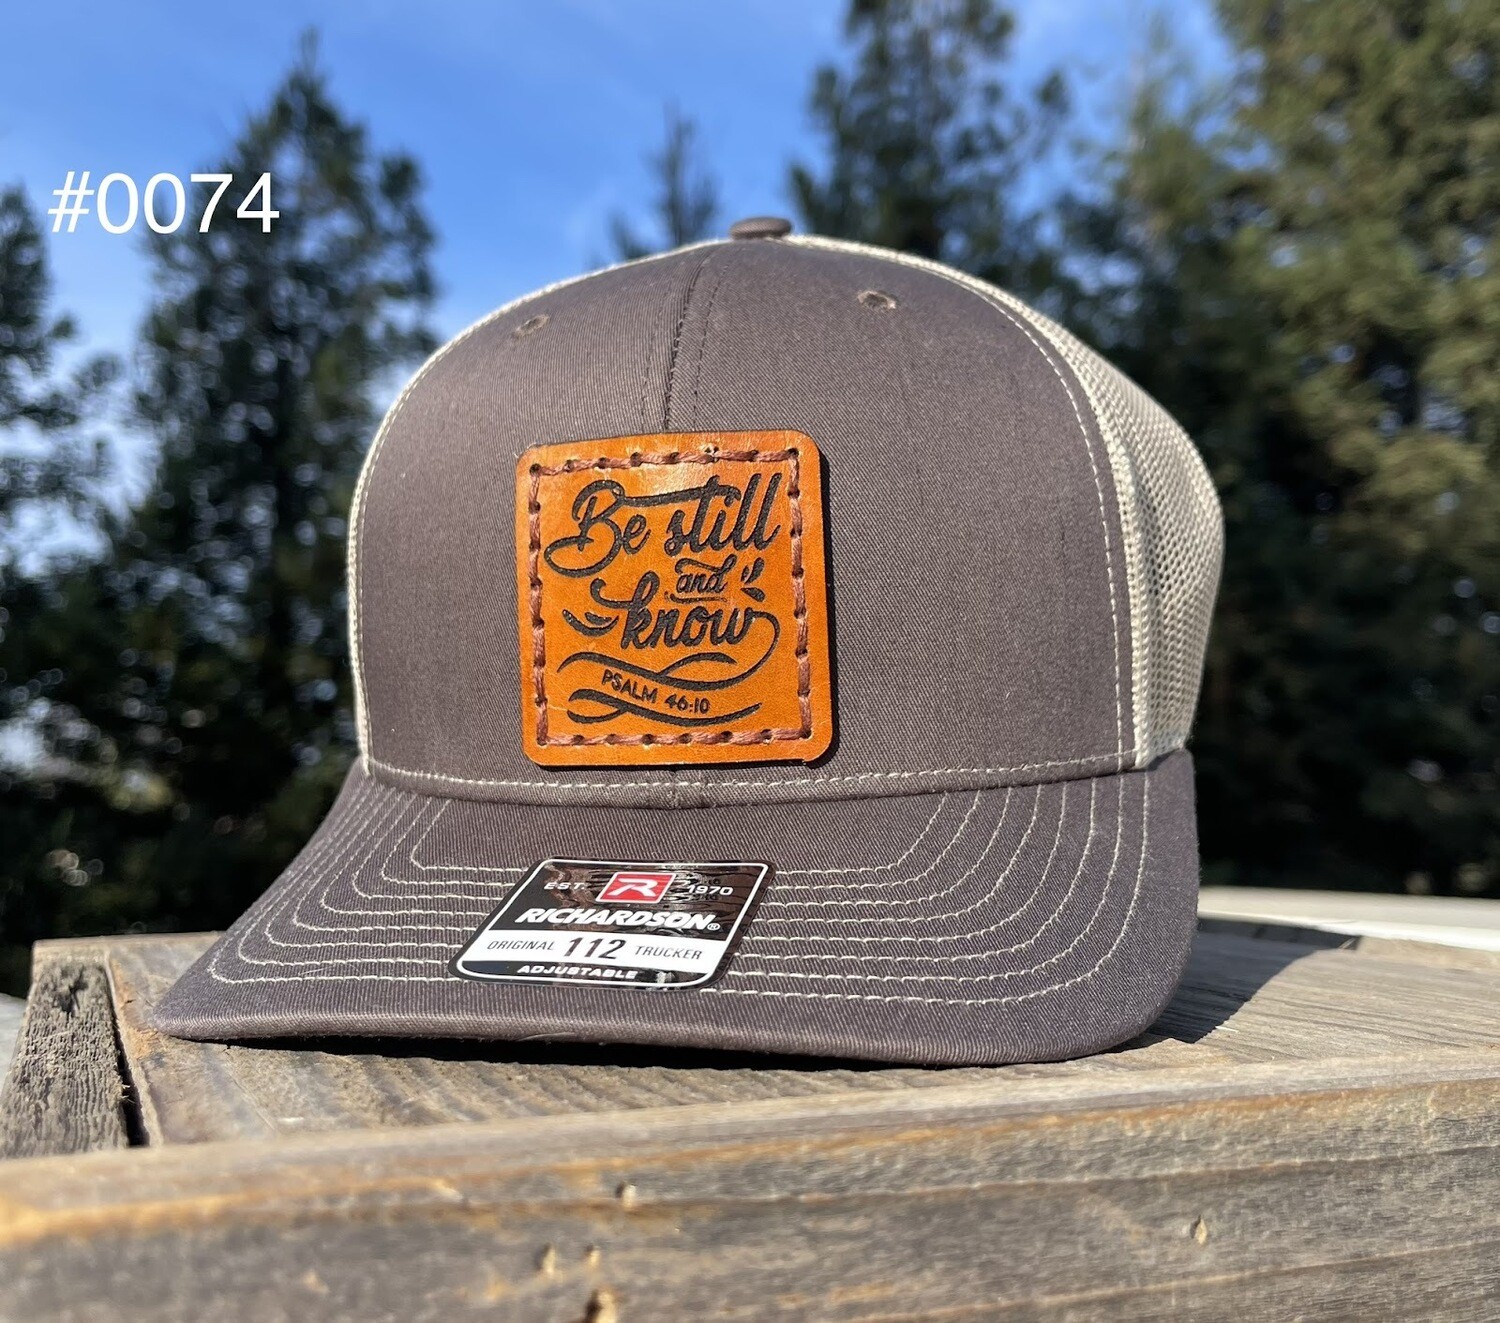 &quot;Be Still and Know&quot; Trucker Cap